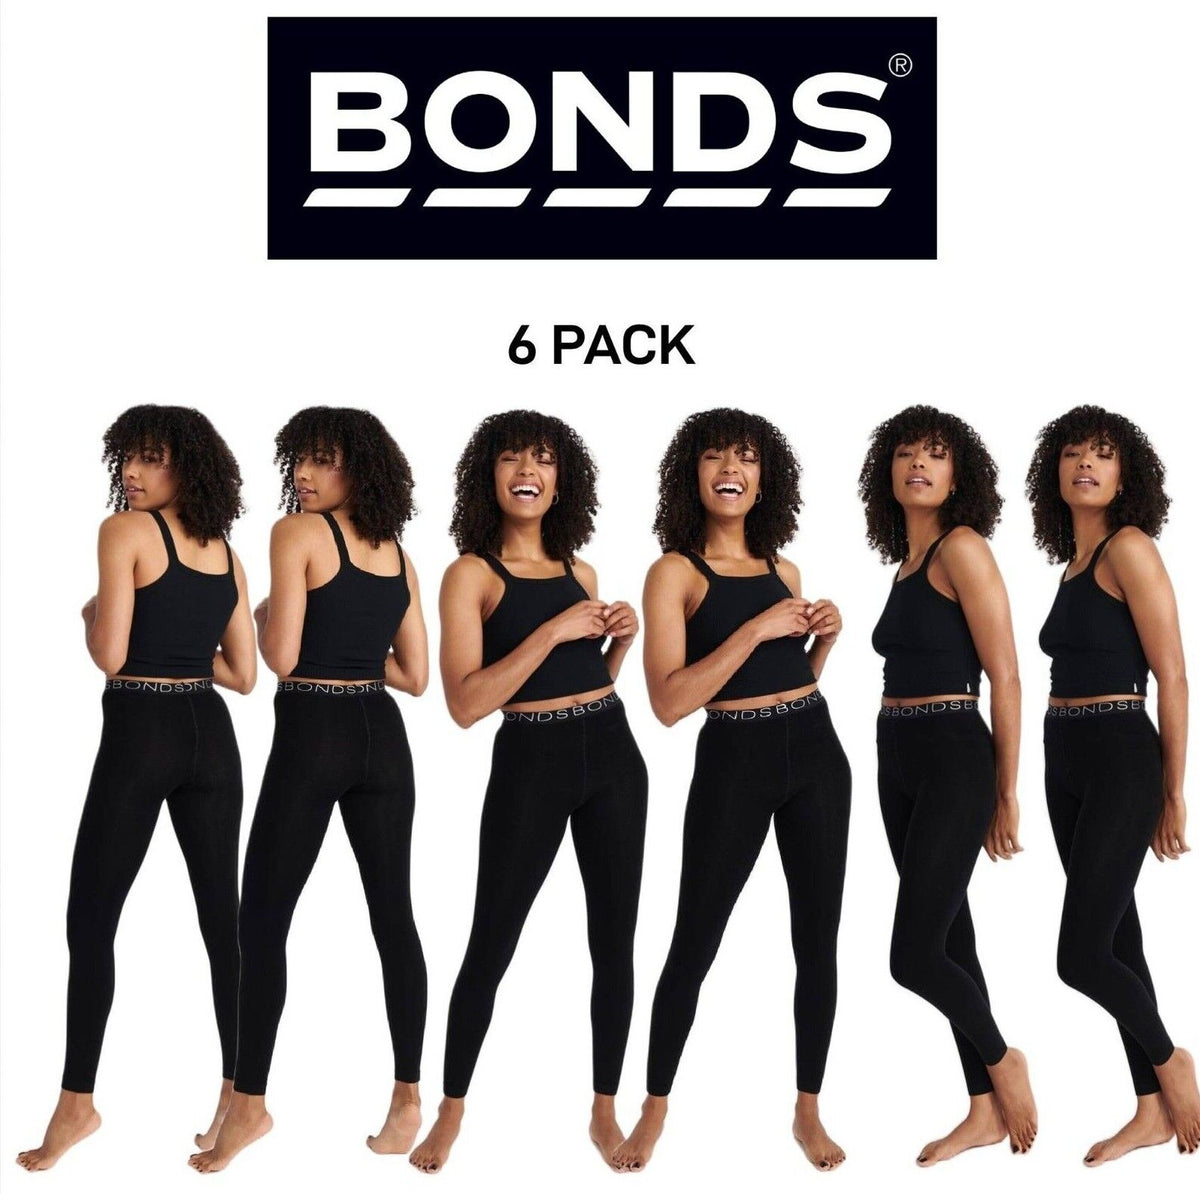 Bonds Womens Fleecy Legging Soft Fleece Fabric for Ultimate Warmth 6 Pack L79542